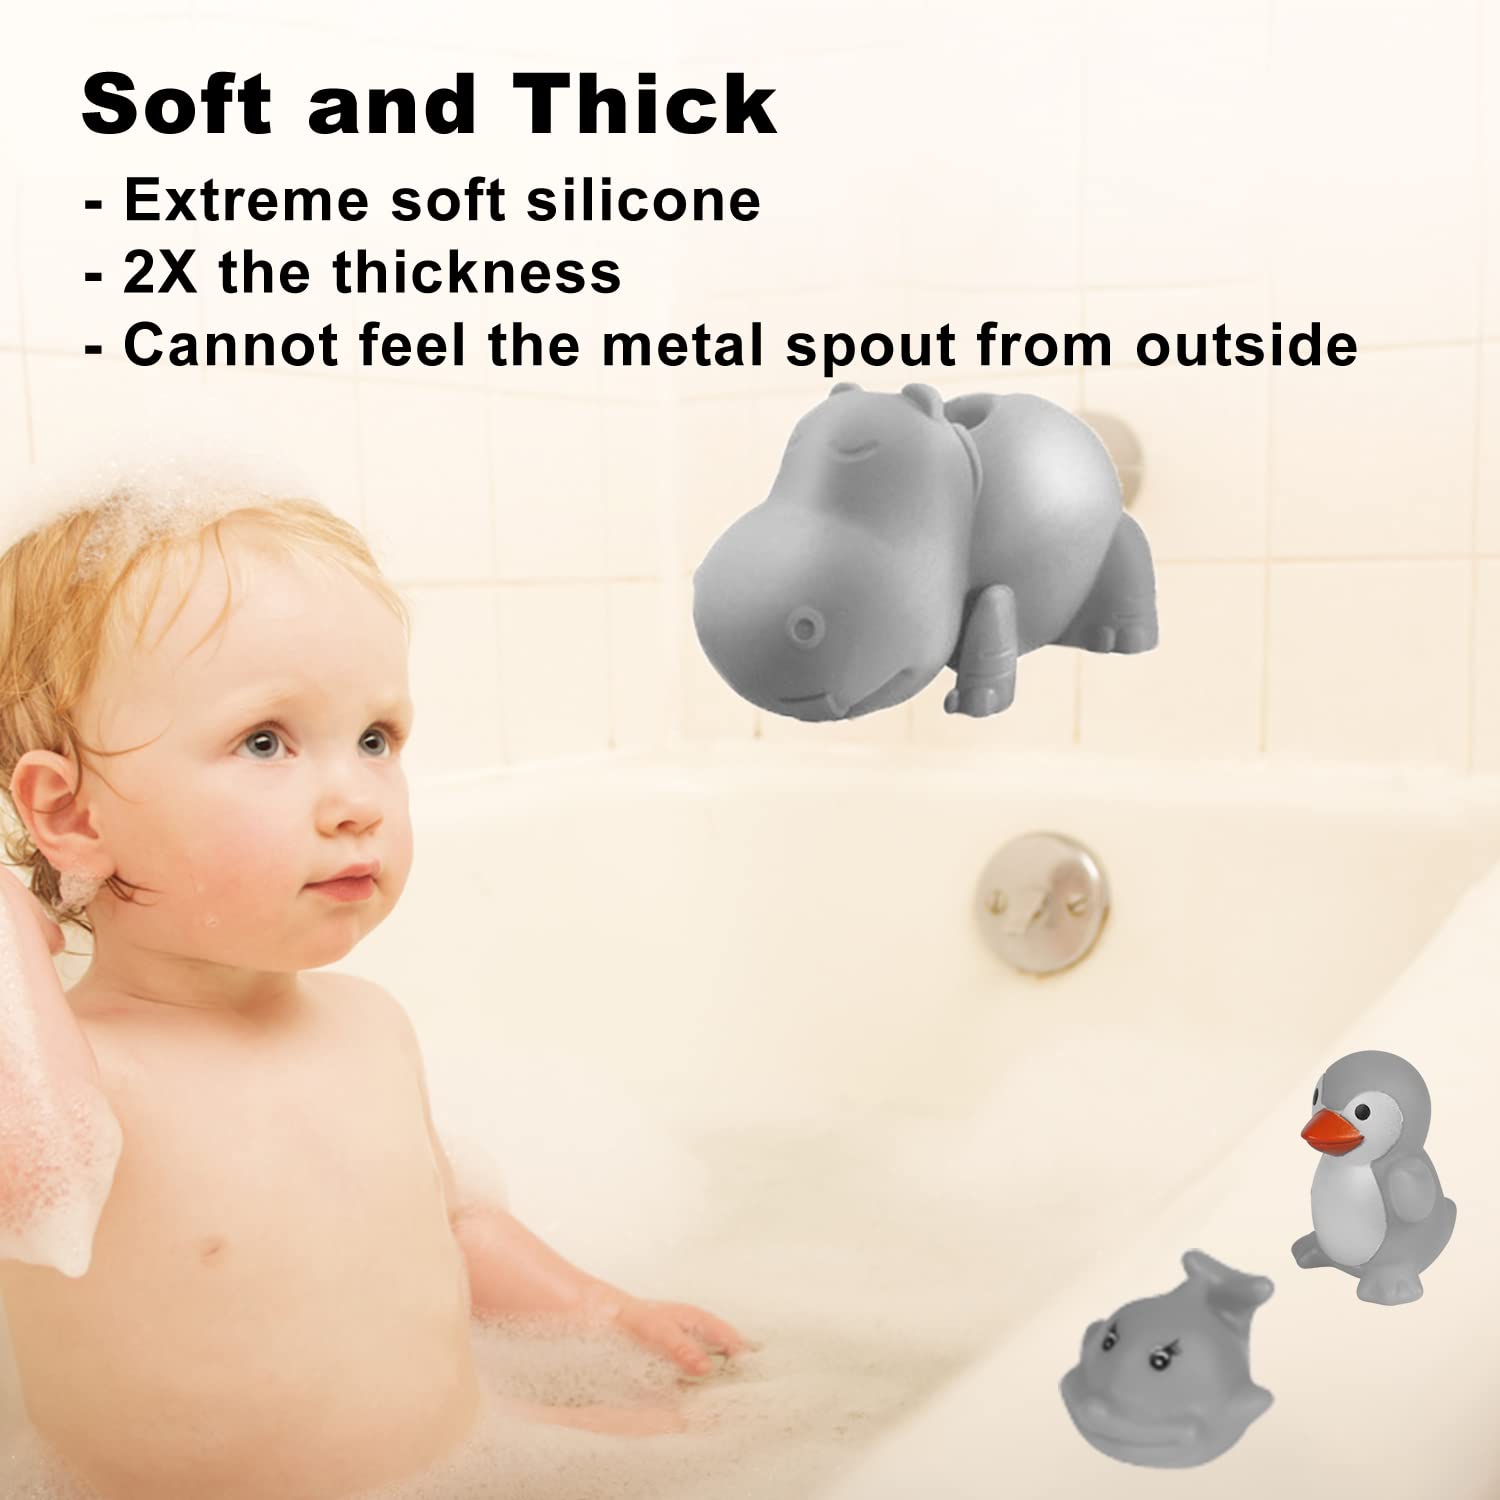 Bath Spout Cover - Faucet Cover Baby - Tub Spout Cover Bathtub Faucet Cover for Kids -Tub Faucet Protector for Baby - Silicone Spout Cover Gray Hippo - Kids Bathroom Accessories - Free Bathtub Toys